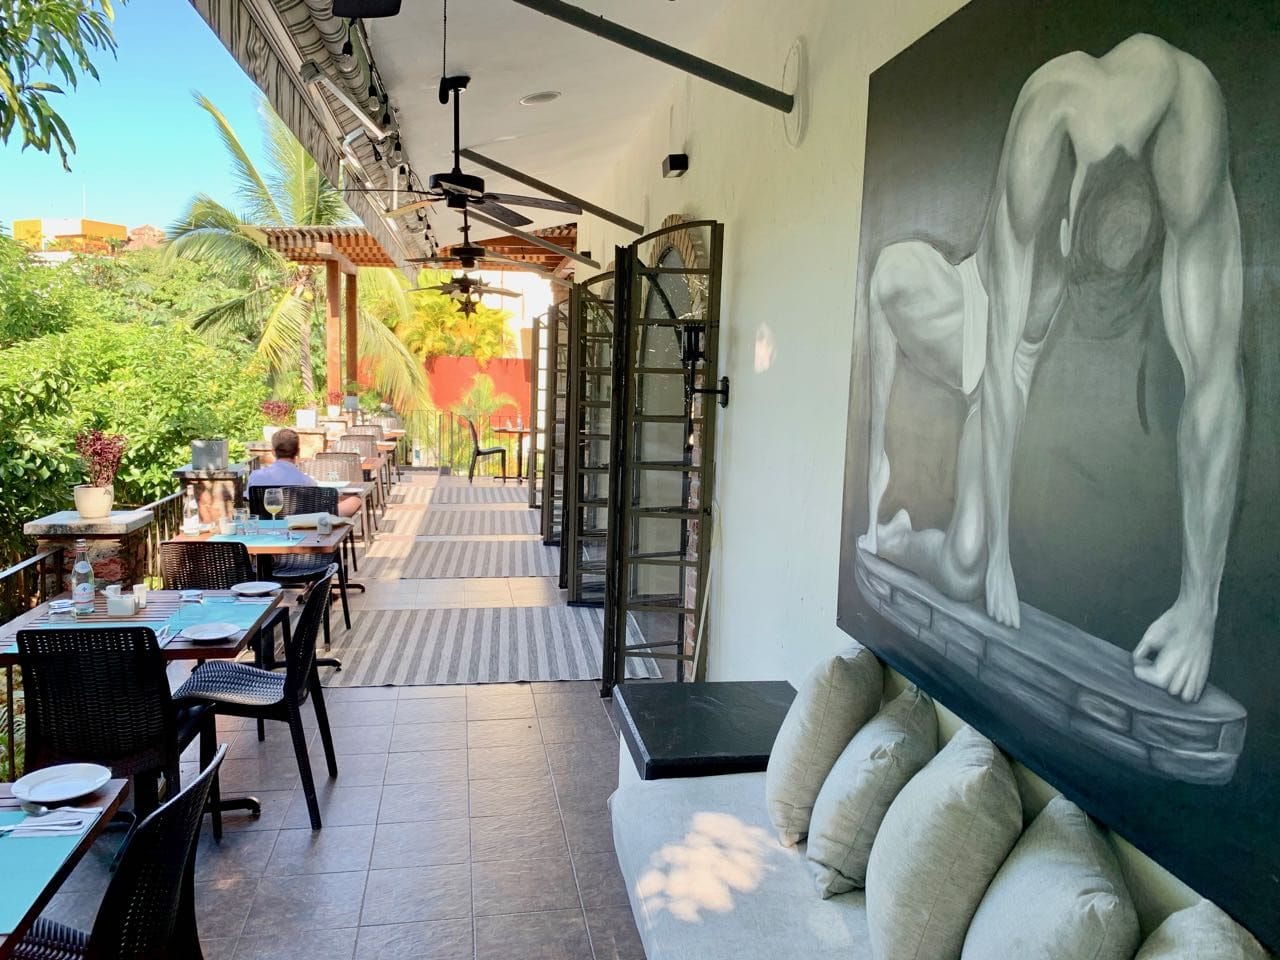 The best gay brunch in Puerto Vallarta can be found at Casa Cupula's Bistro Teresa.